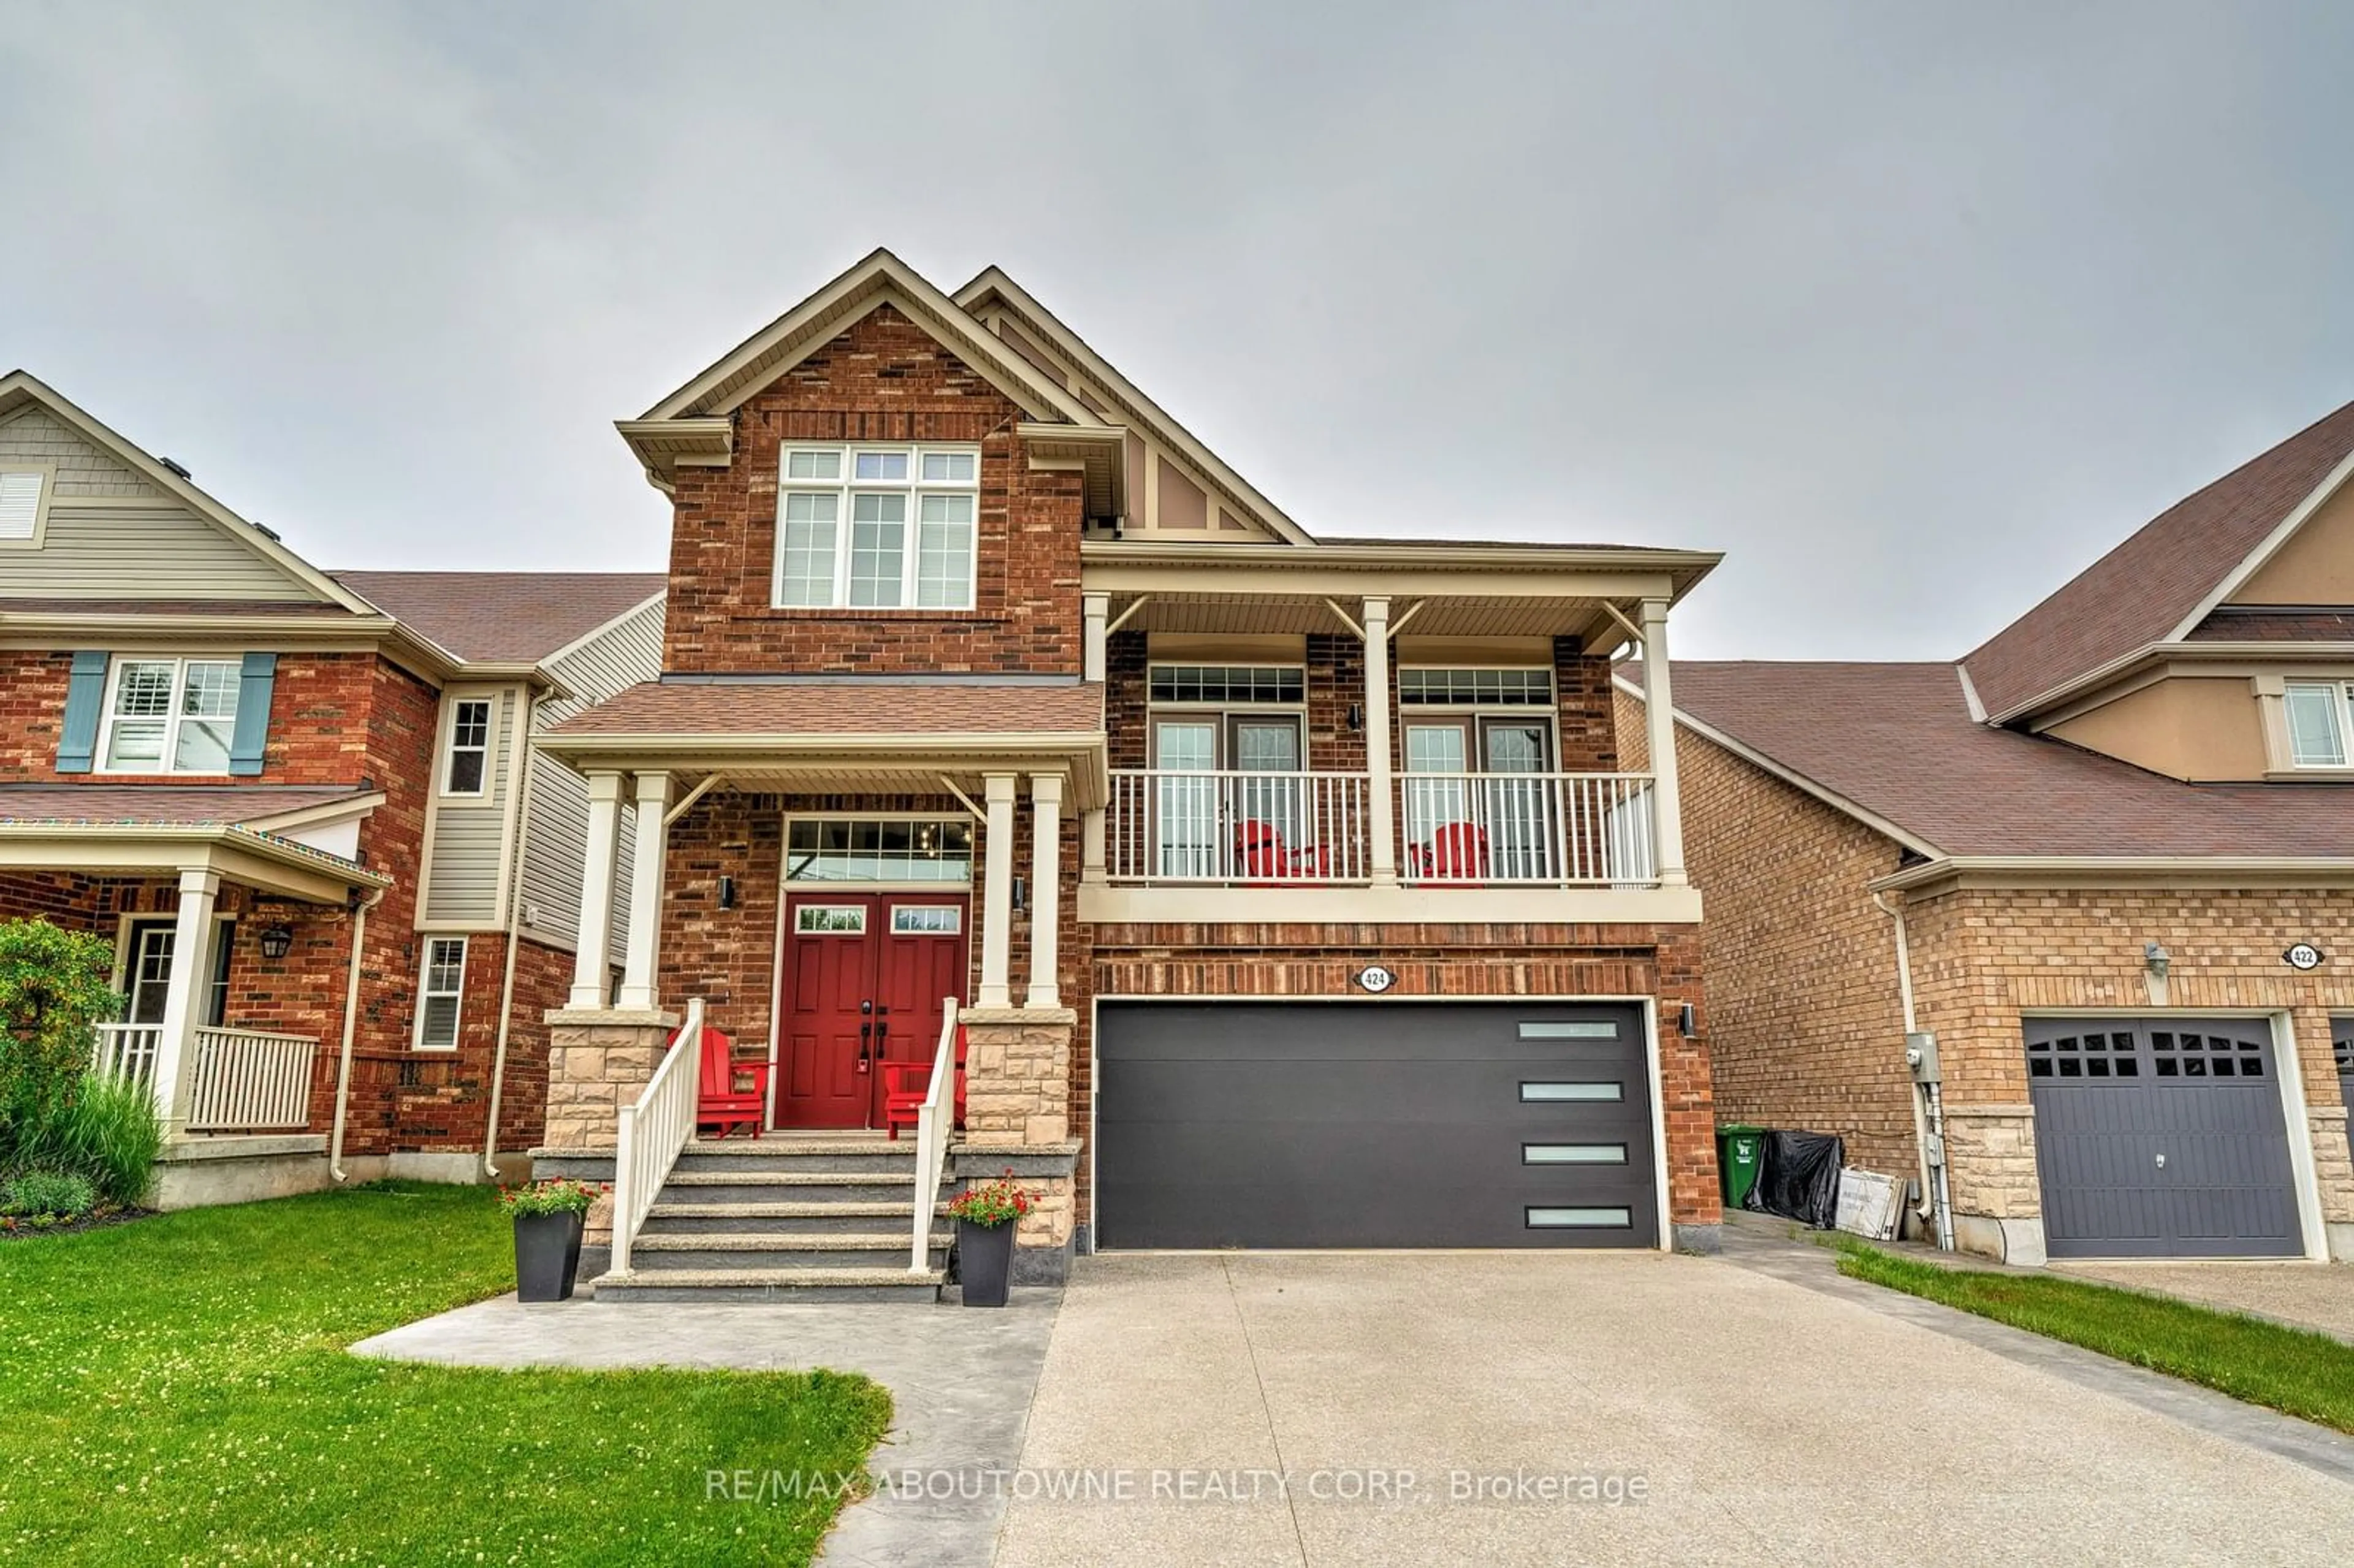 Home with brick exterior material for 424 Kitty Murray Lane, Hamilton Ontario L9G 3K9